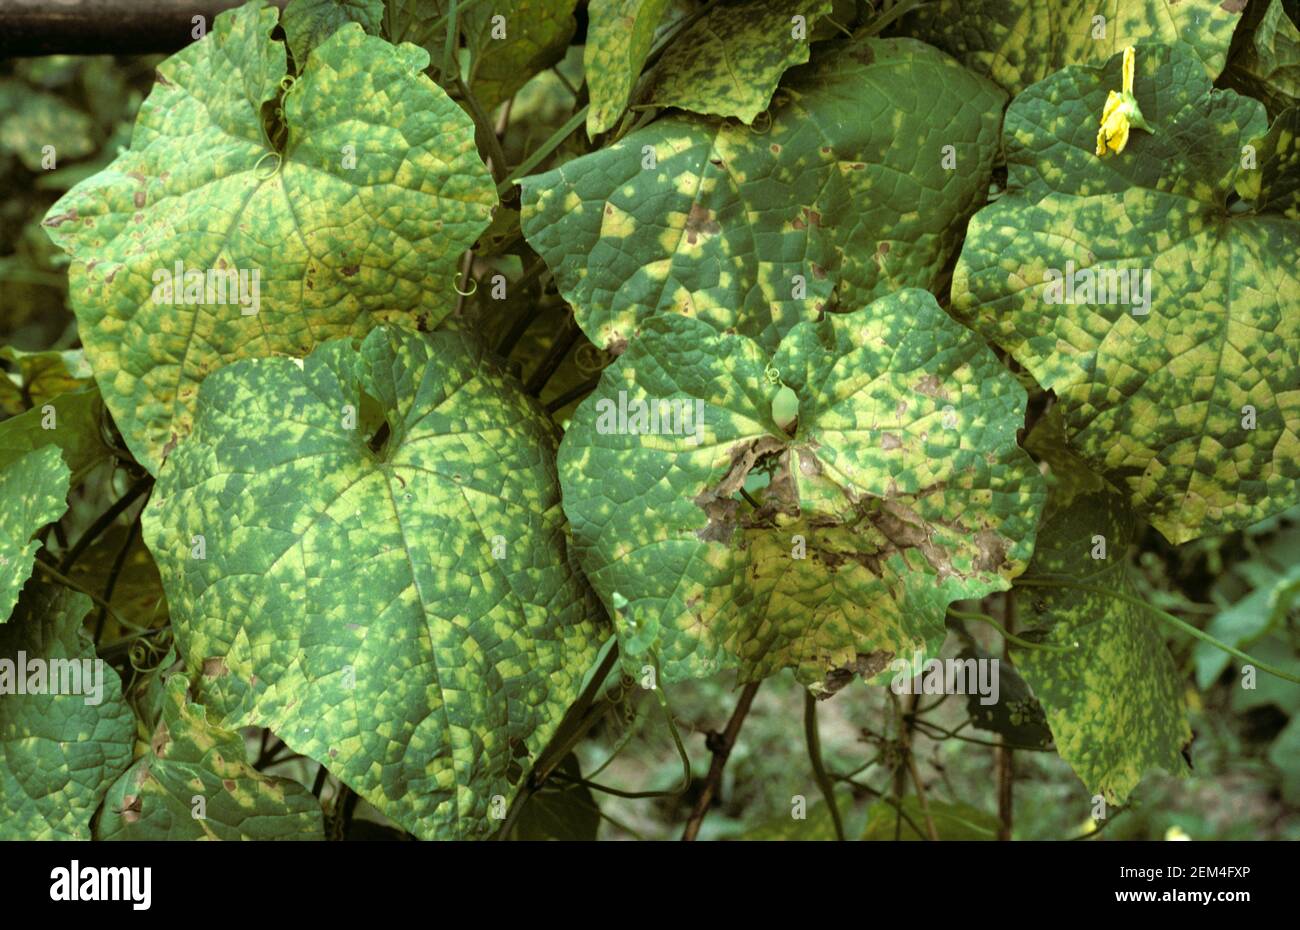 Downy mildew (Pseudoperonospora cubensis) a water mould causing downy mildew lesions on the leaf of a squash plant, Thailand Stock Photo